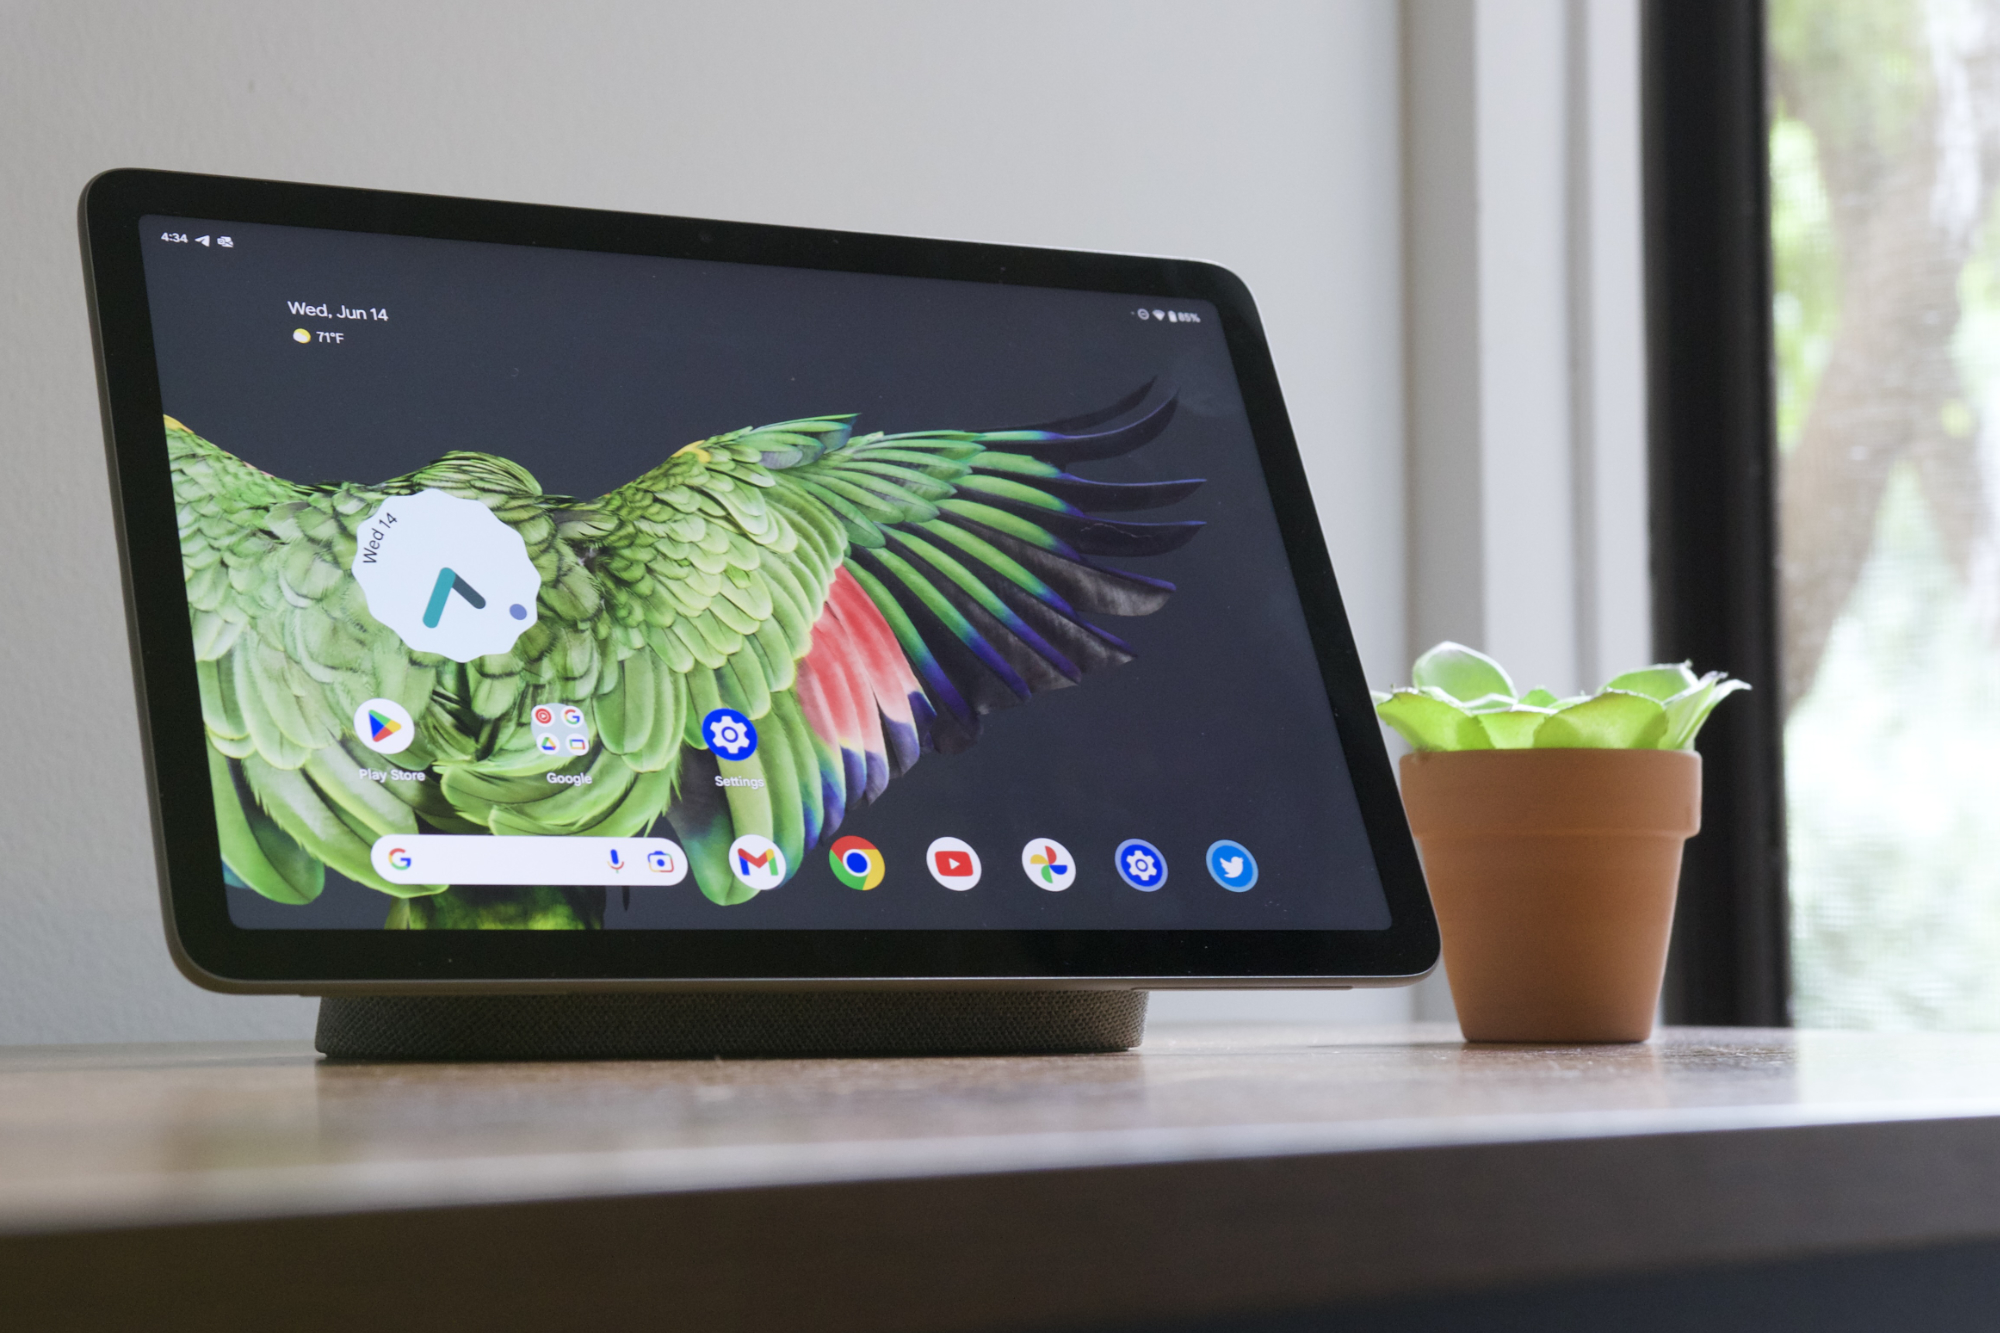 Google Pixel Tablet review: It's all about the dock